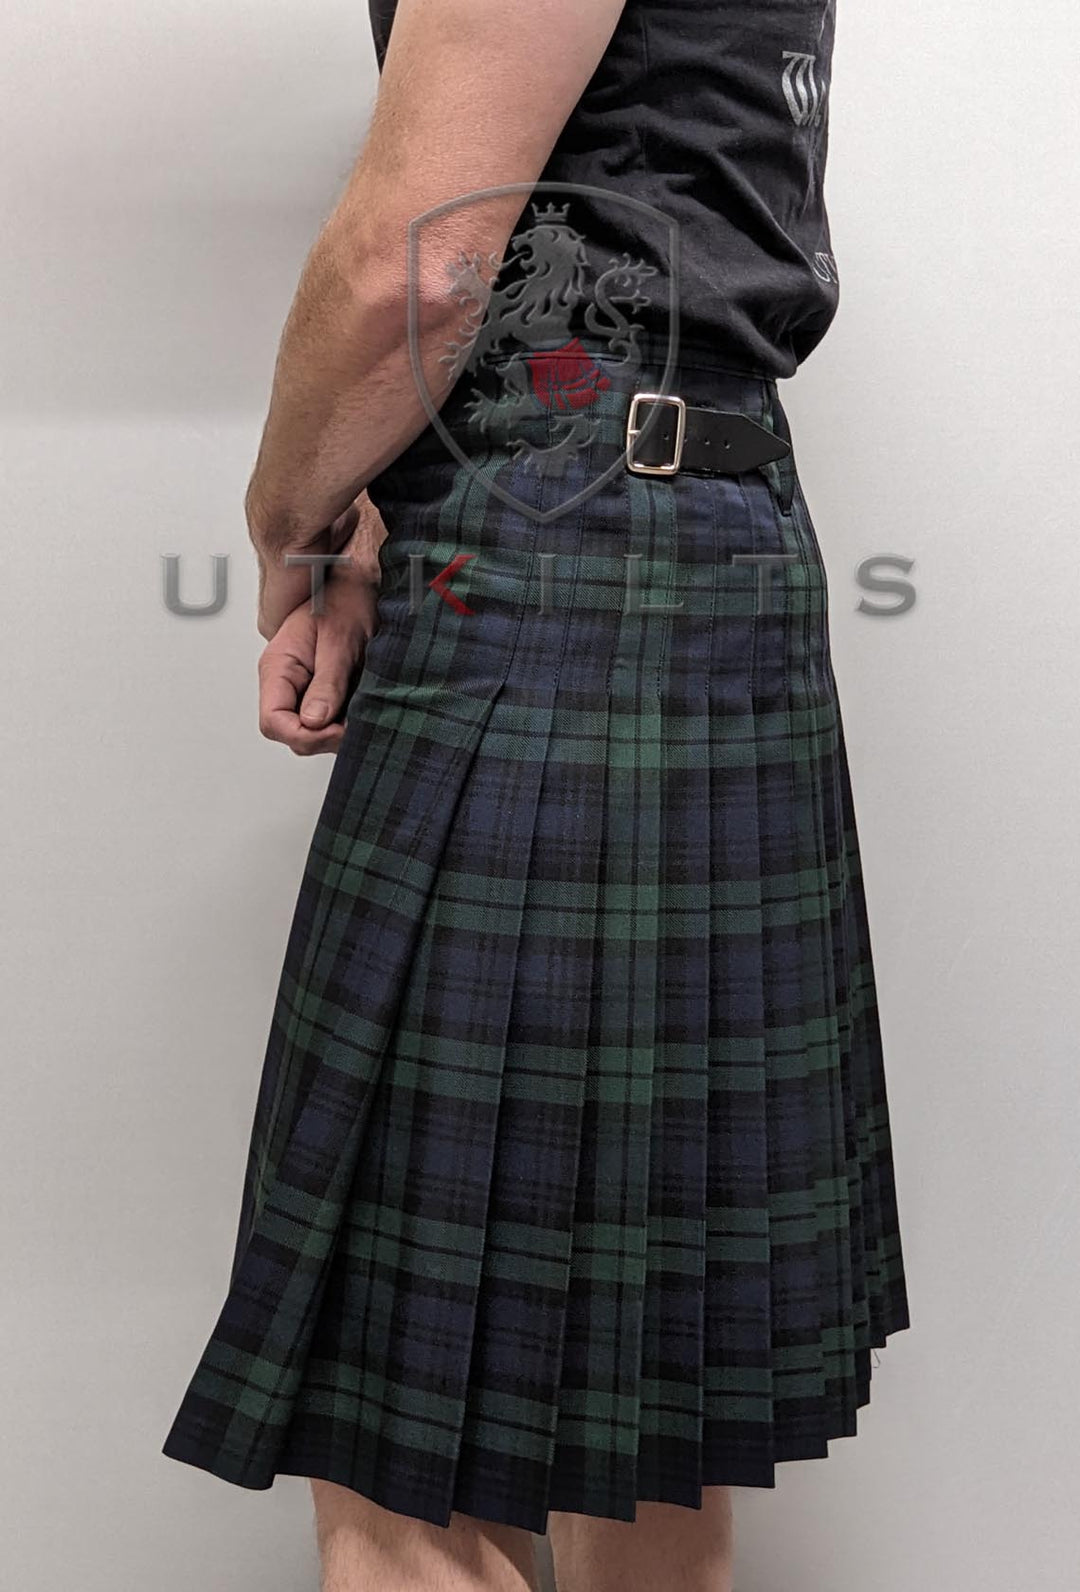 CLEARANCE! 5 Yard Made in Scotland Black Watch Polyviscose Tartan Kilt - Includes free Military Style Safety Kilt Pin